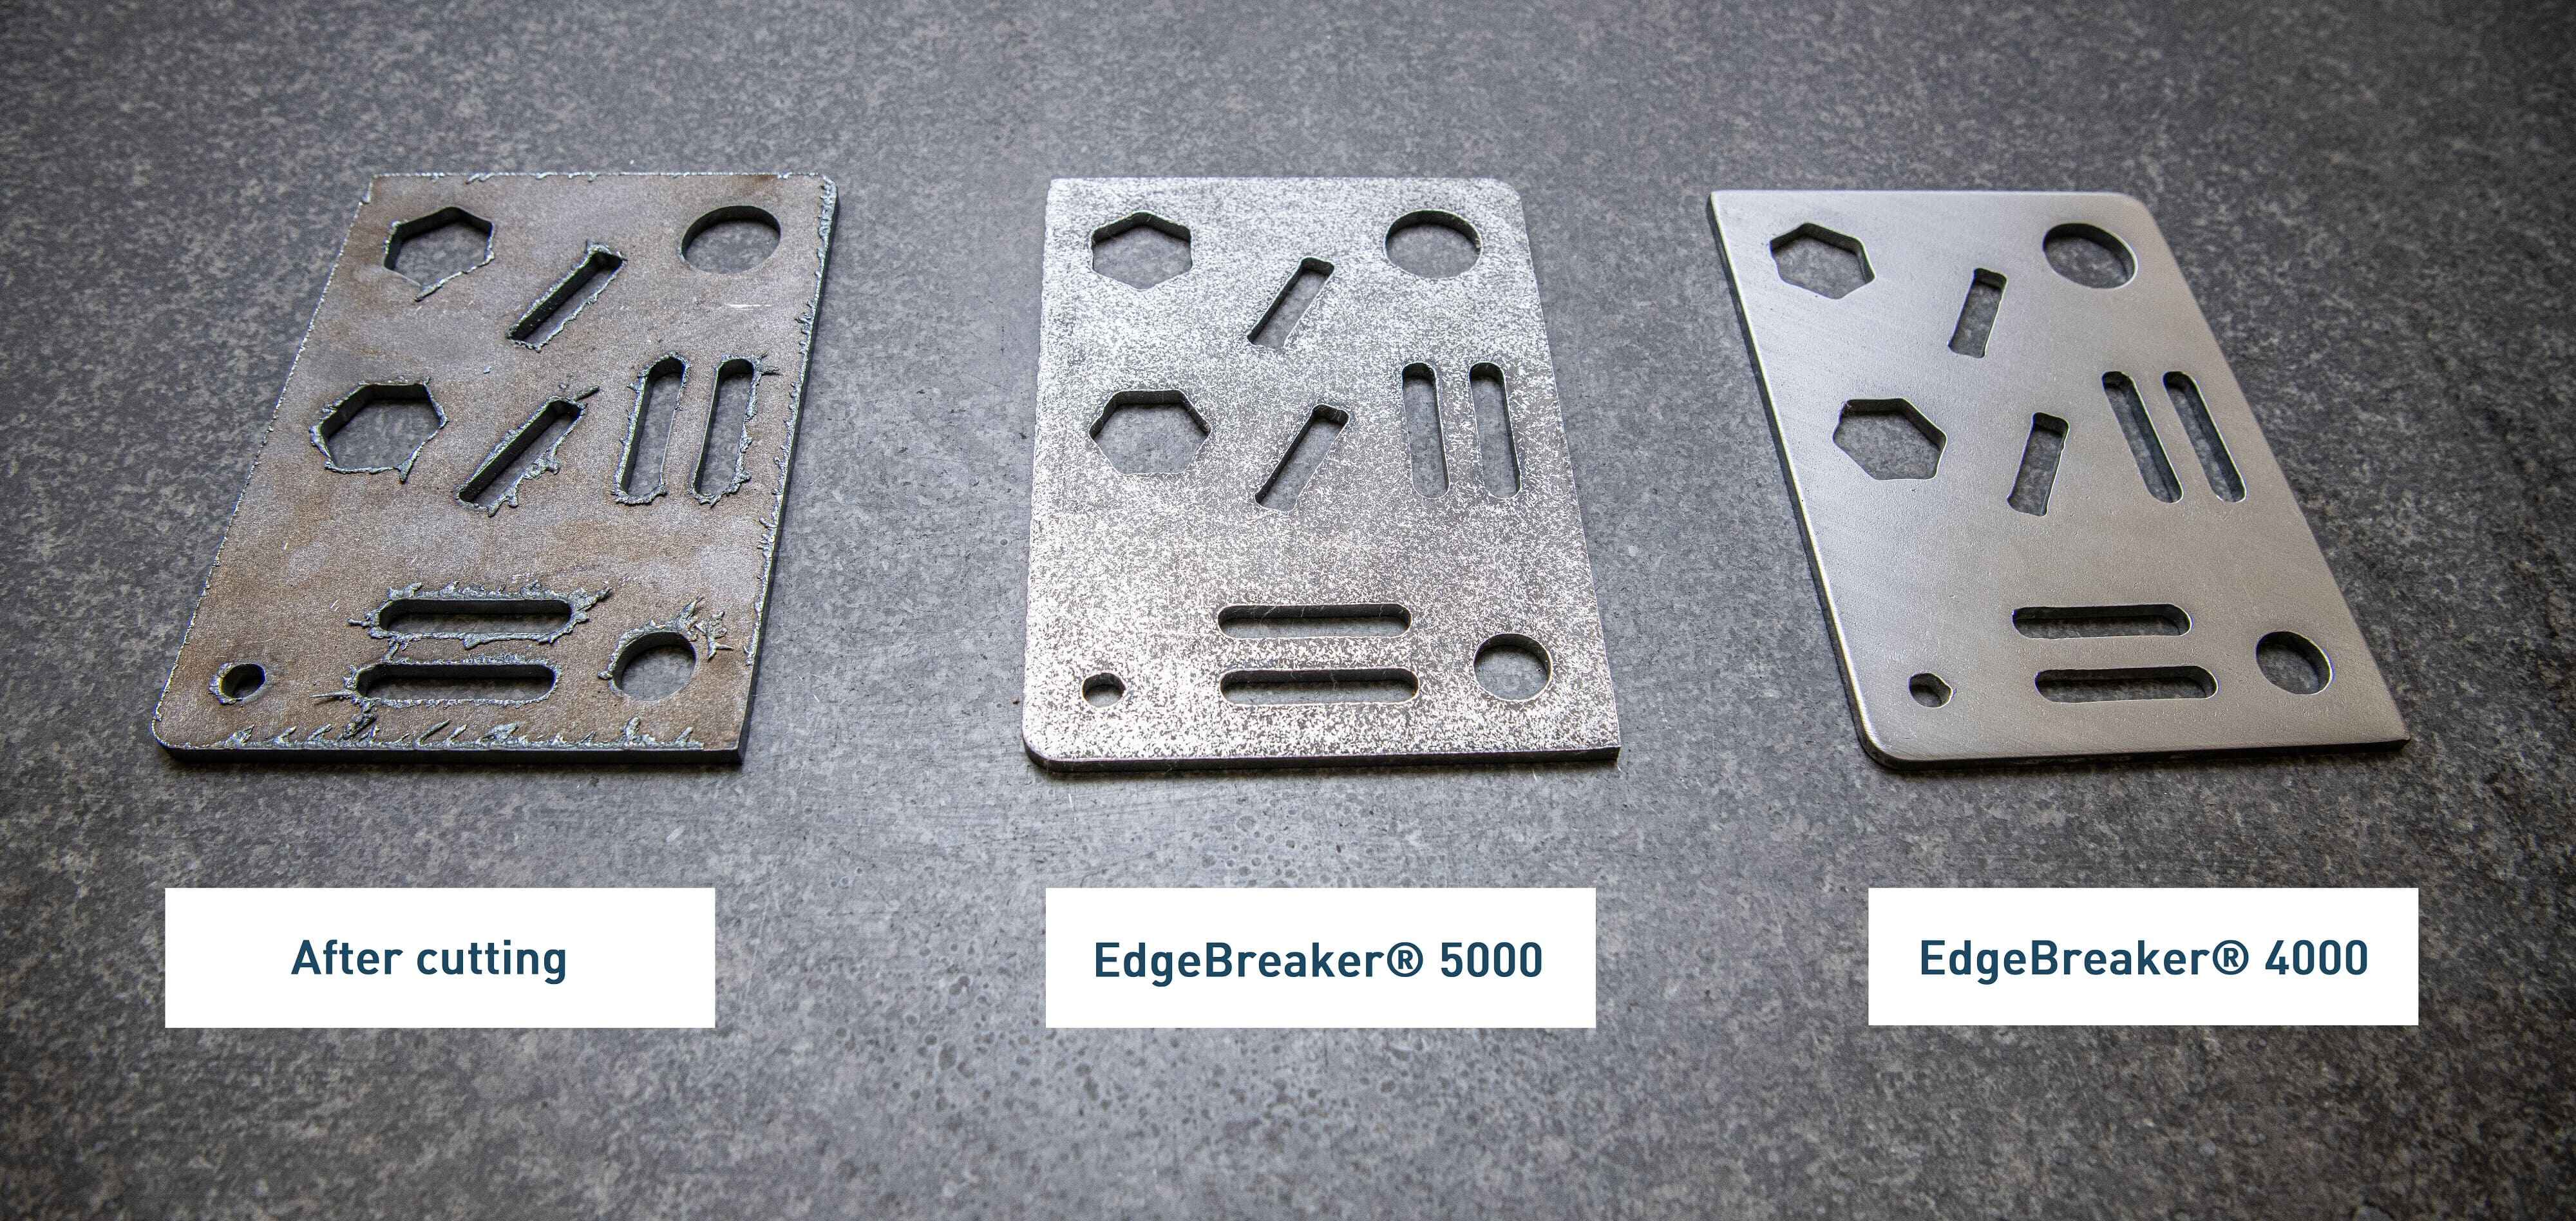 EB 9000 before and after parts with labels EN (size reduced)